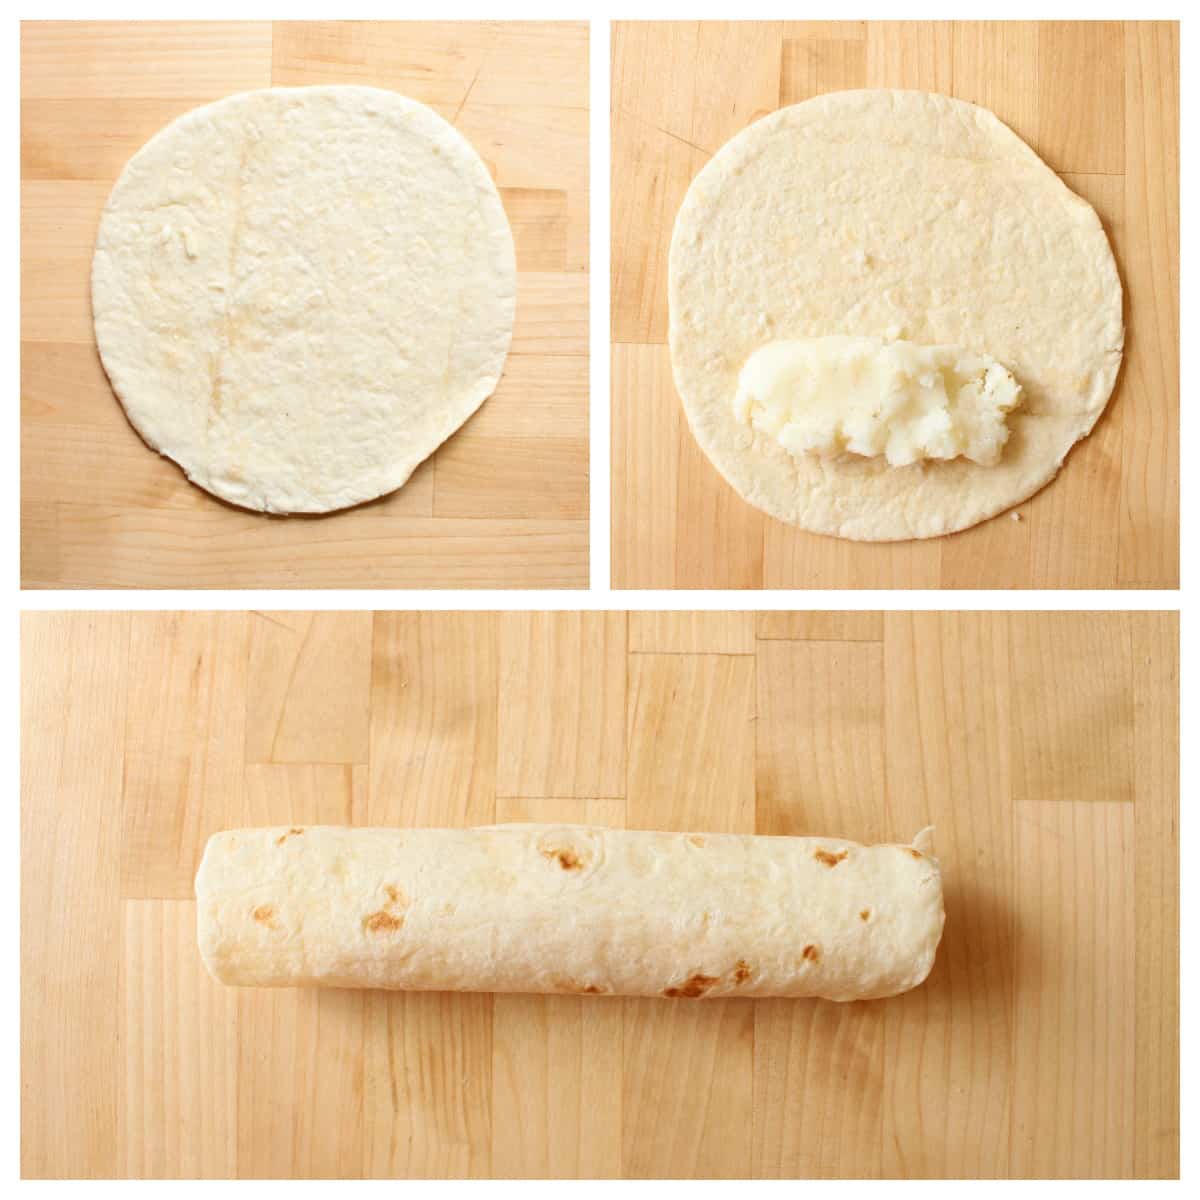 A collage showing how to assemble and roll up the flautas.